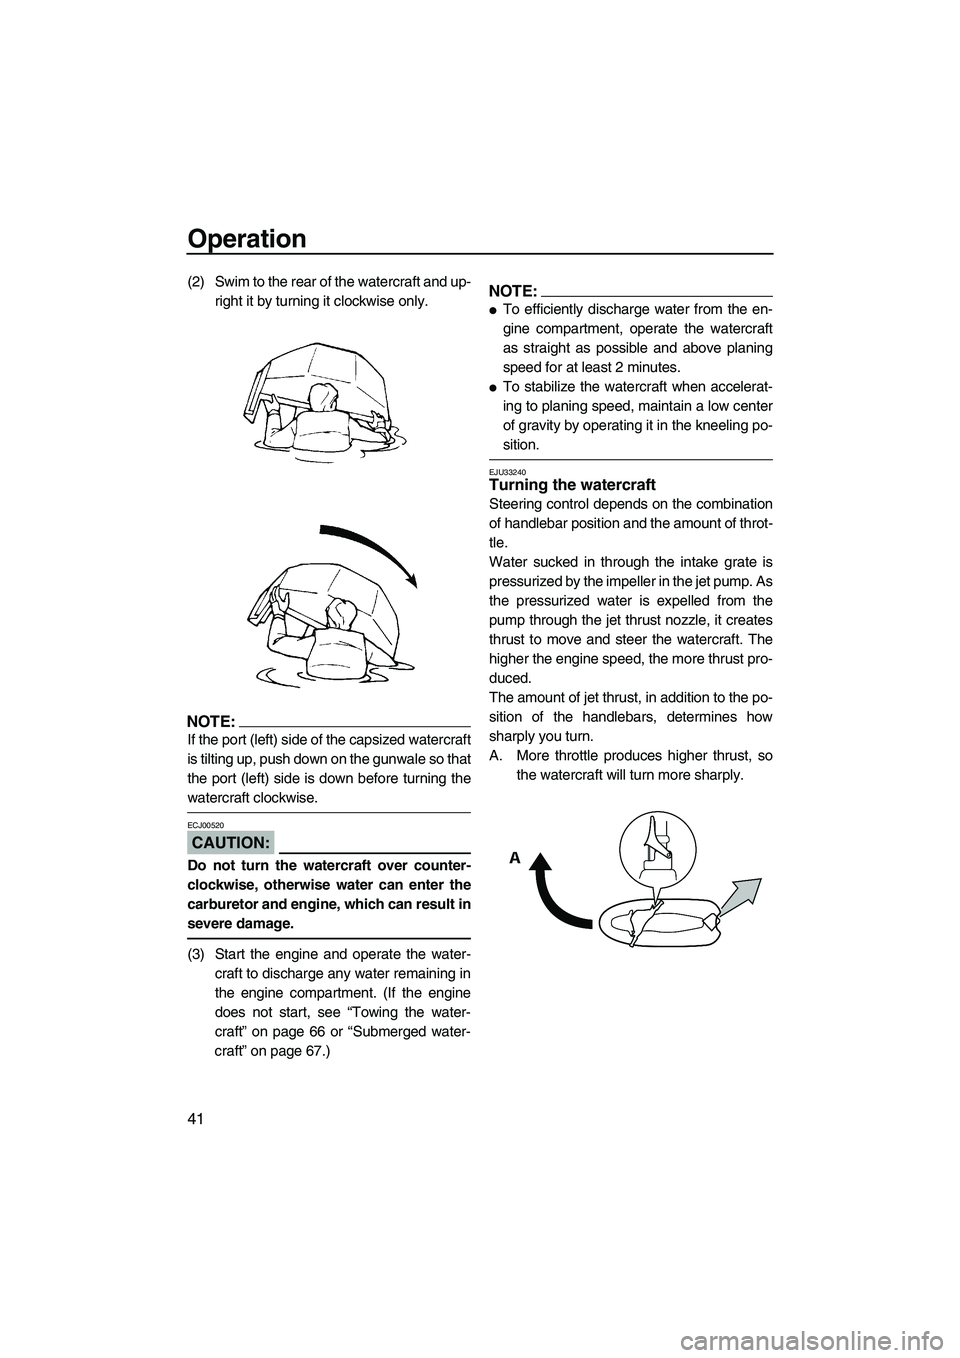 YAMAHA SUPERJET 2007 Service Manual Operation
41
(2) Swim to the rear of the watercraft and up-
right it by turning it clockwise only.
NOTE:
If the port (left) side of the capsized watercraft
is tilting up, push down on the gunwale so t